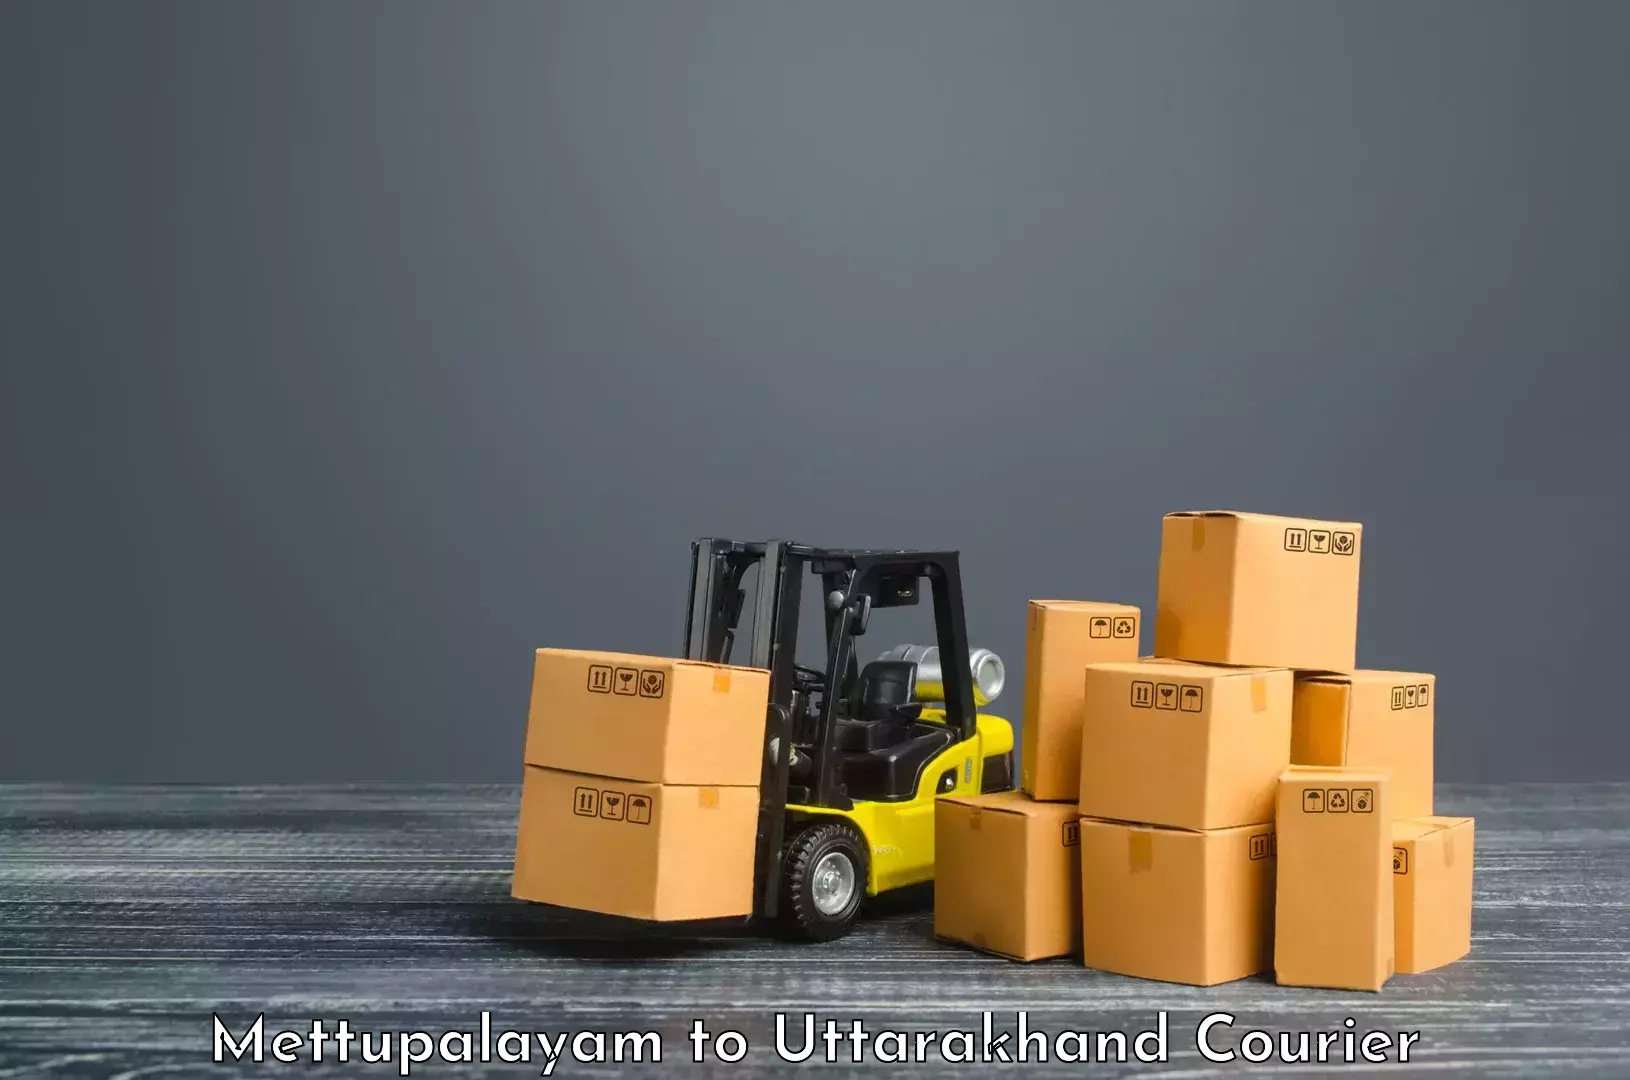 Punctual parcel services Mettupalayam to Roorkee